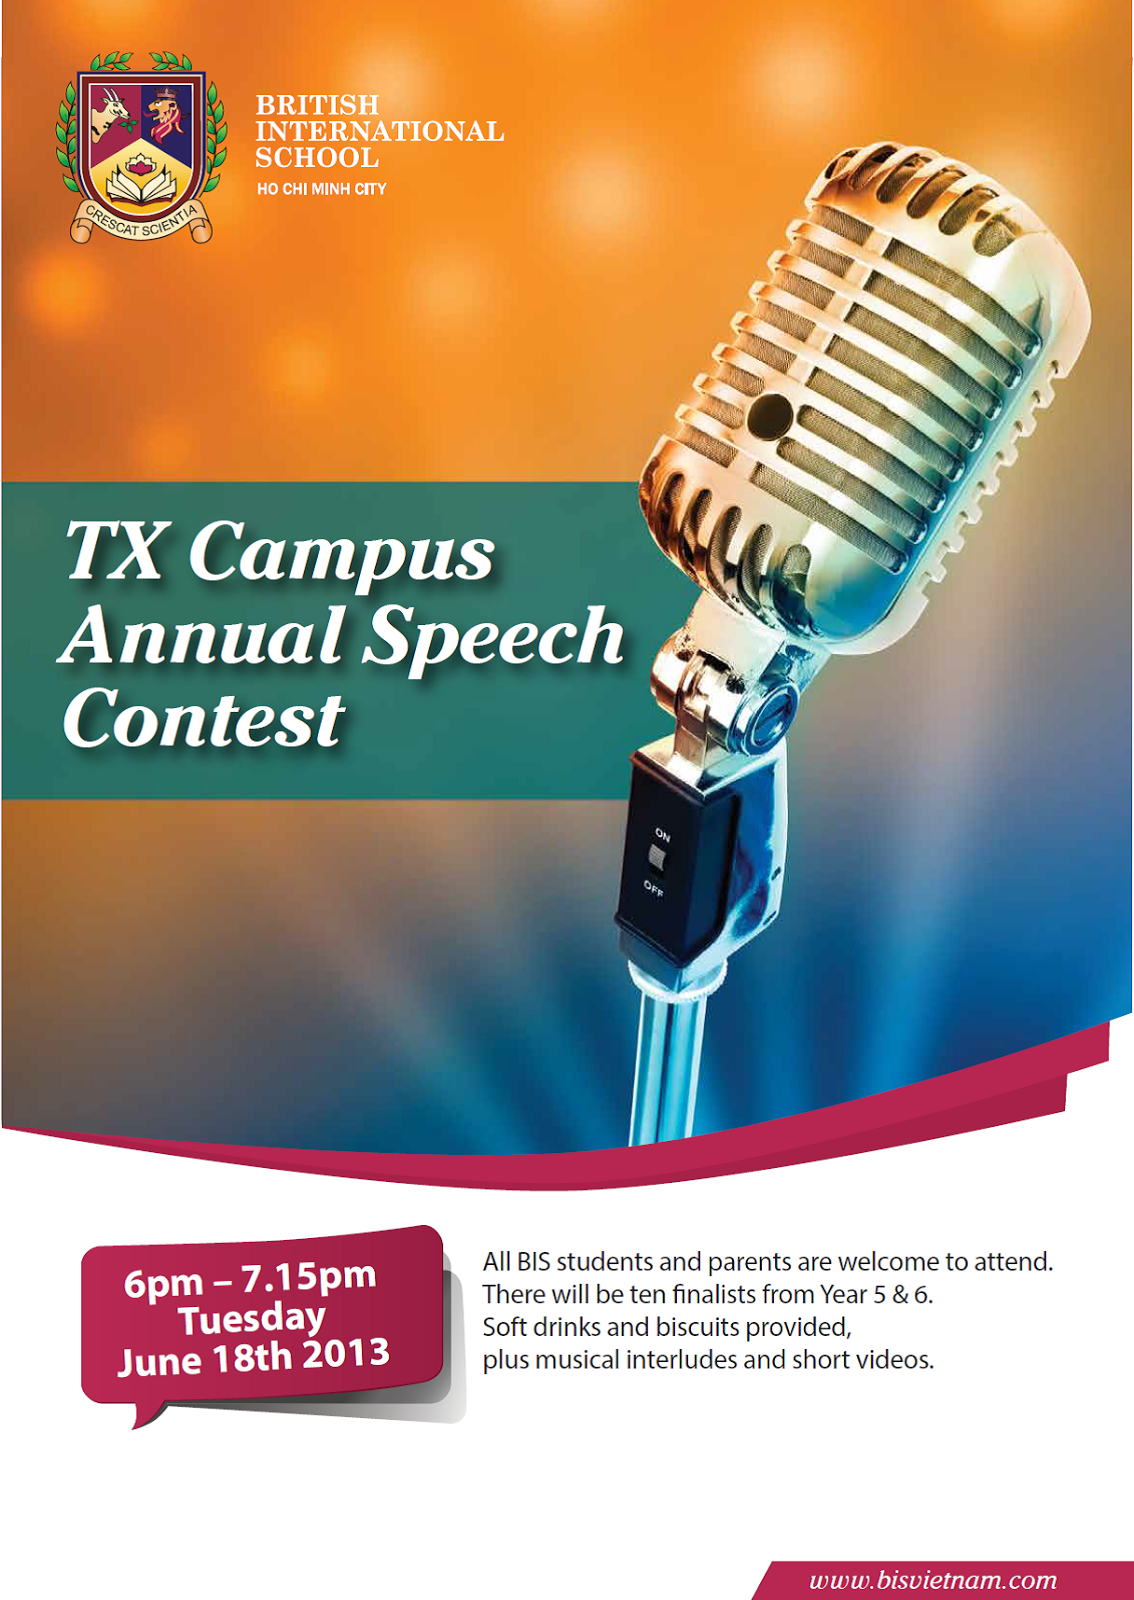 Nice Speech Contest Flyer Design Toastmasters Flyer Design throughout proportions 1134 X 1600